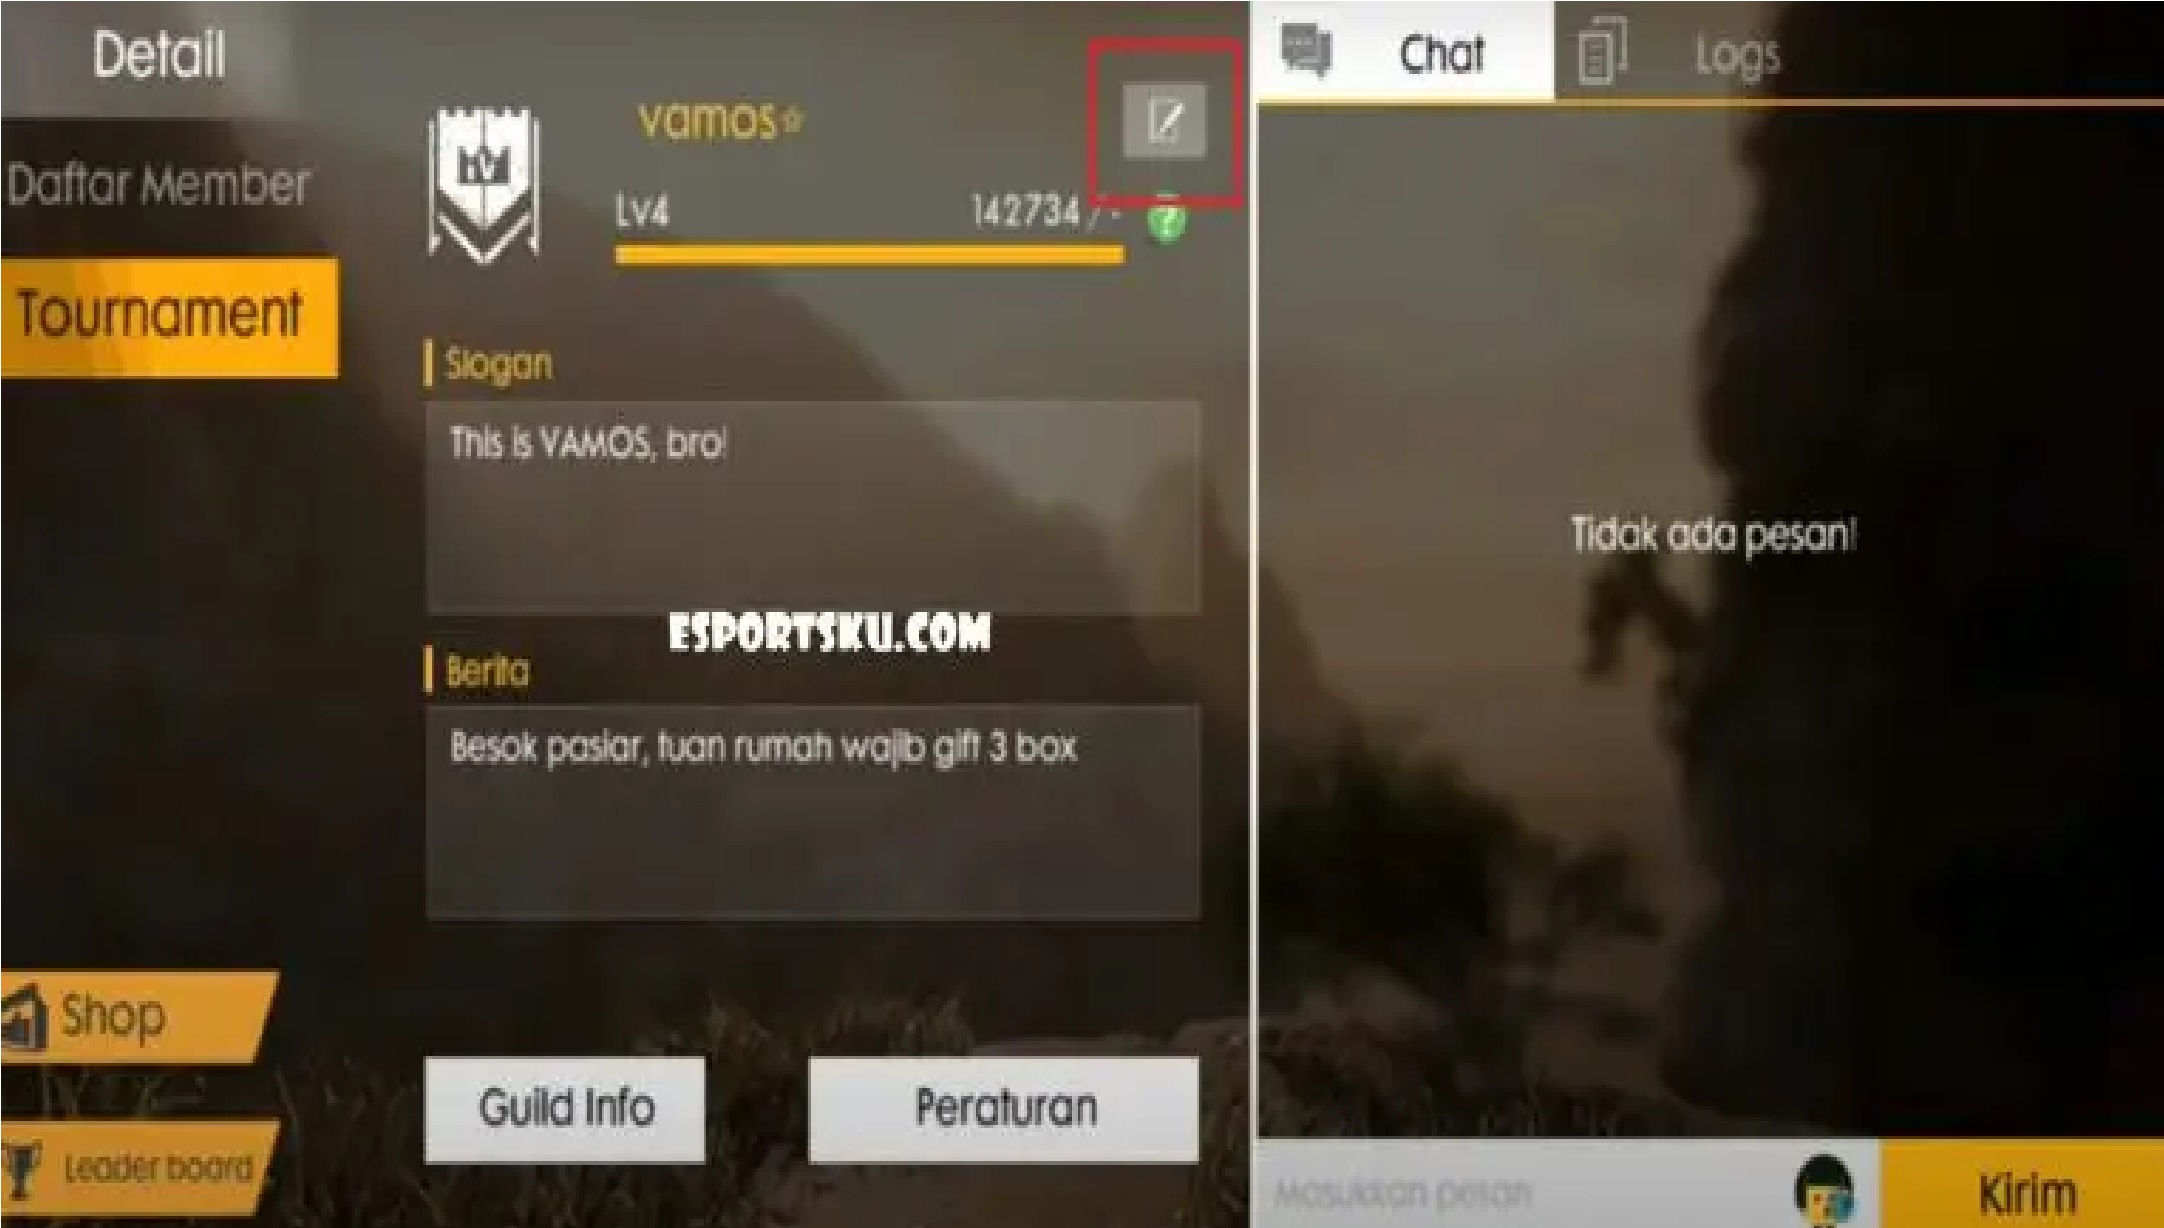 How To Change Your Guild Name In Free Fire Ff Esportsku